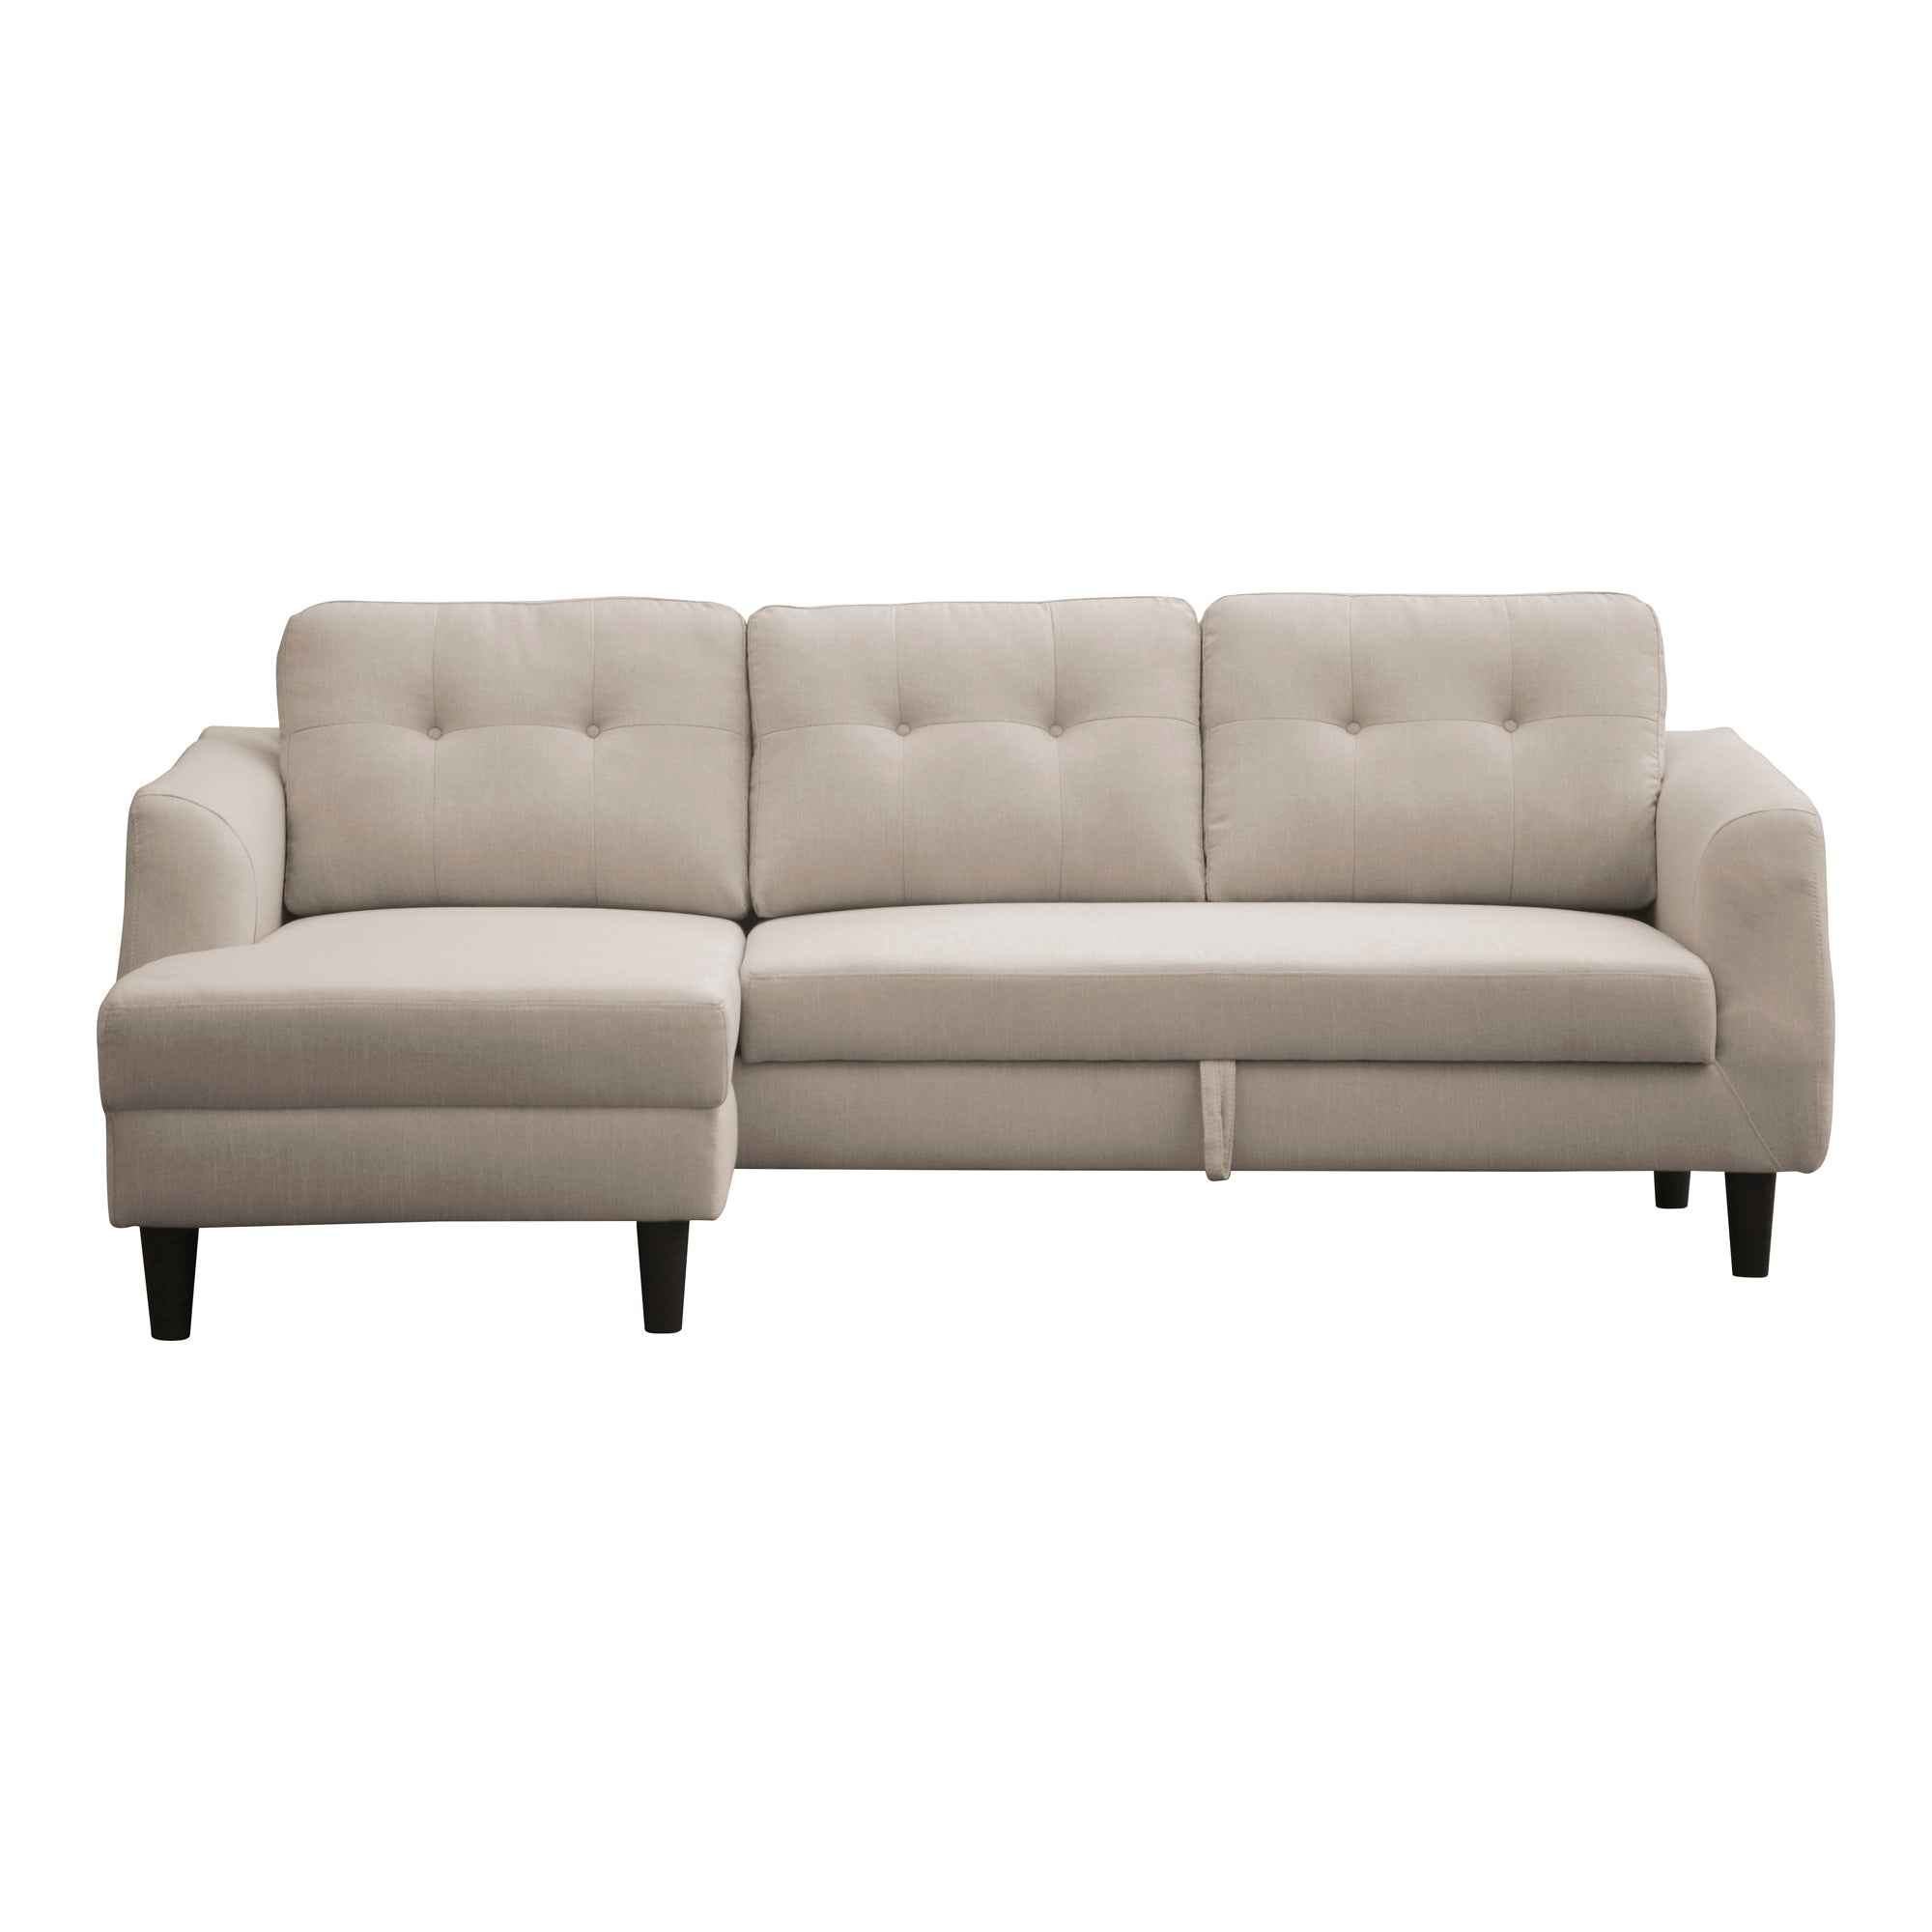 Belagio Sofa Bed With Left-Facing Chaise